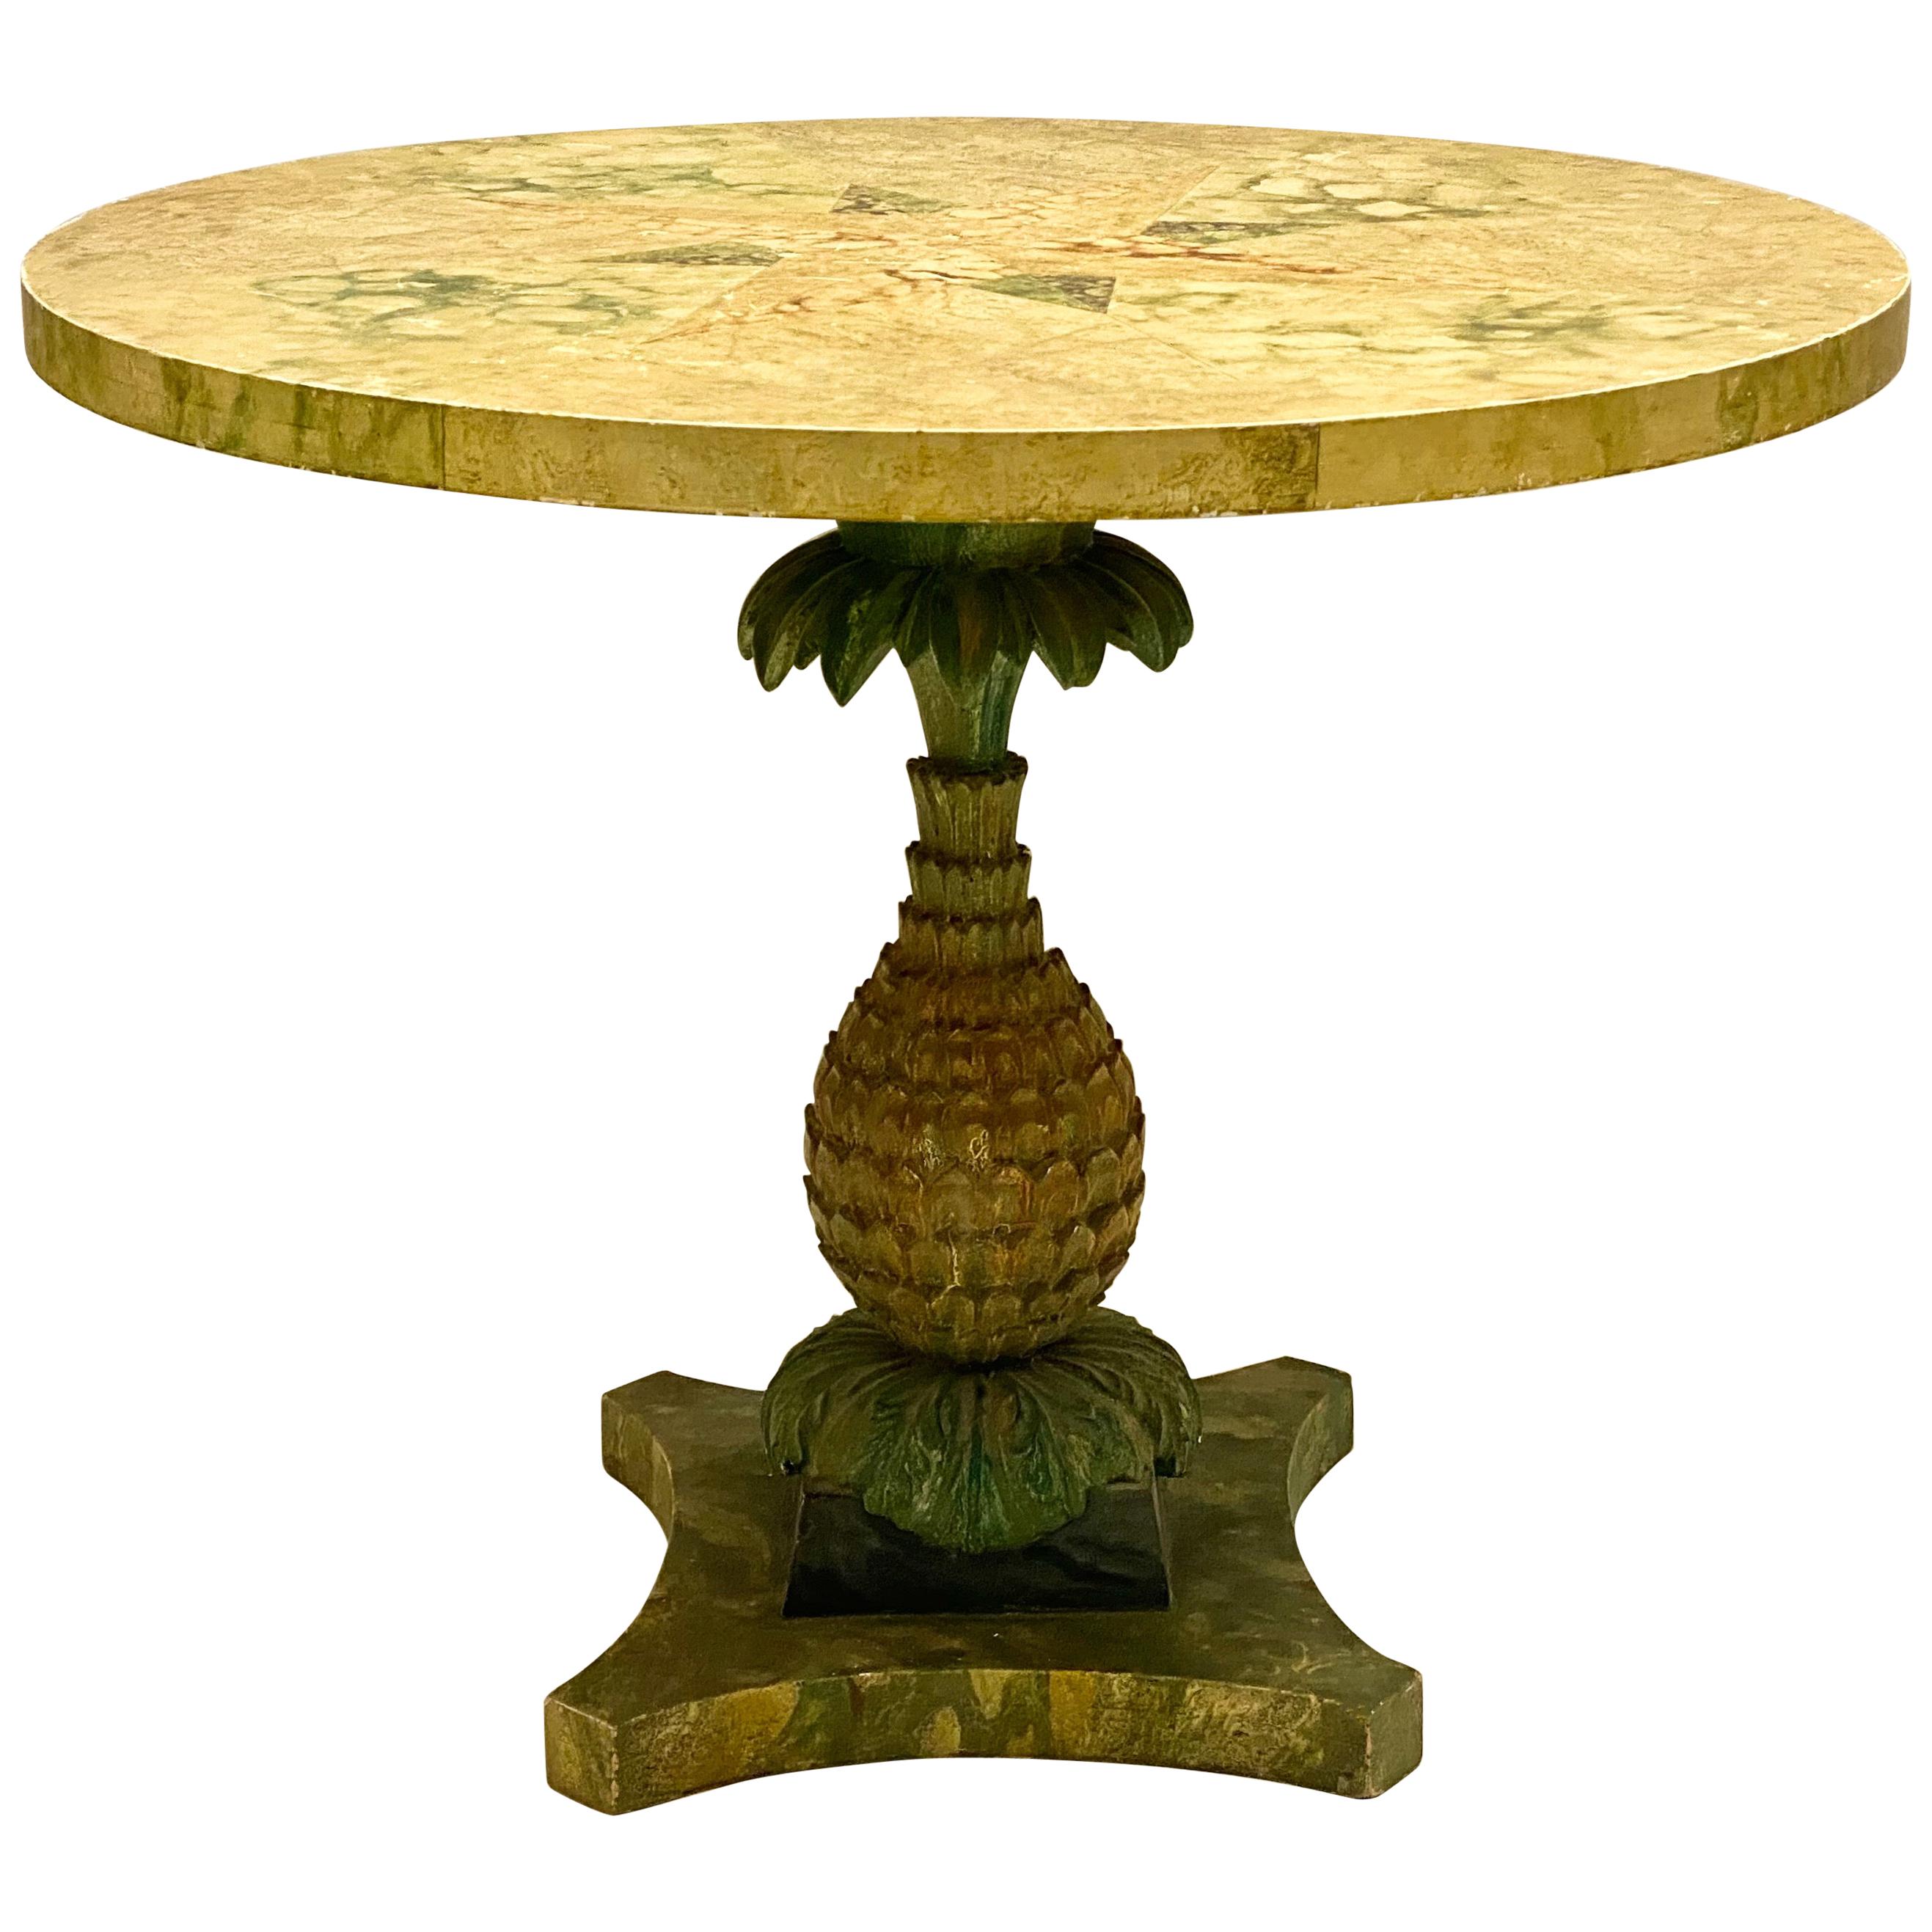 1960s Italian Cast Plaster Pineapple and Faux Marble Center Table